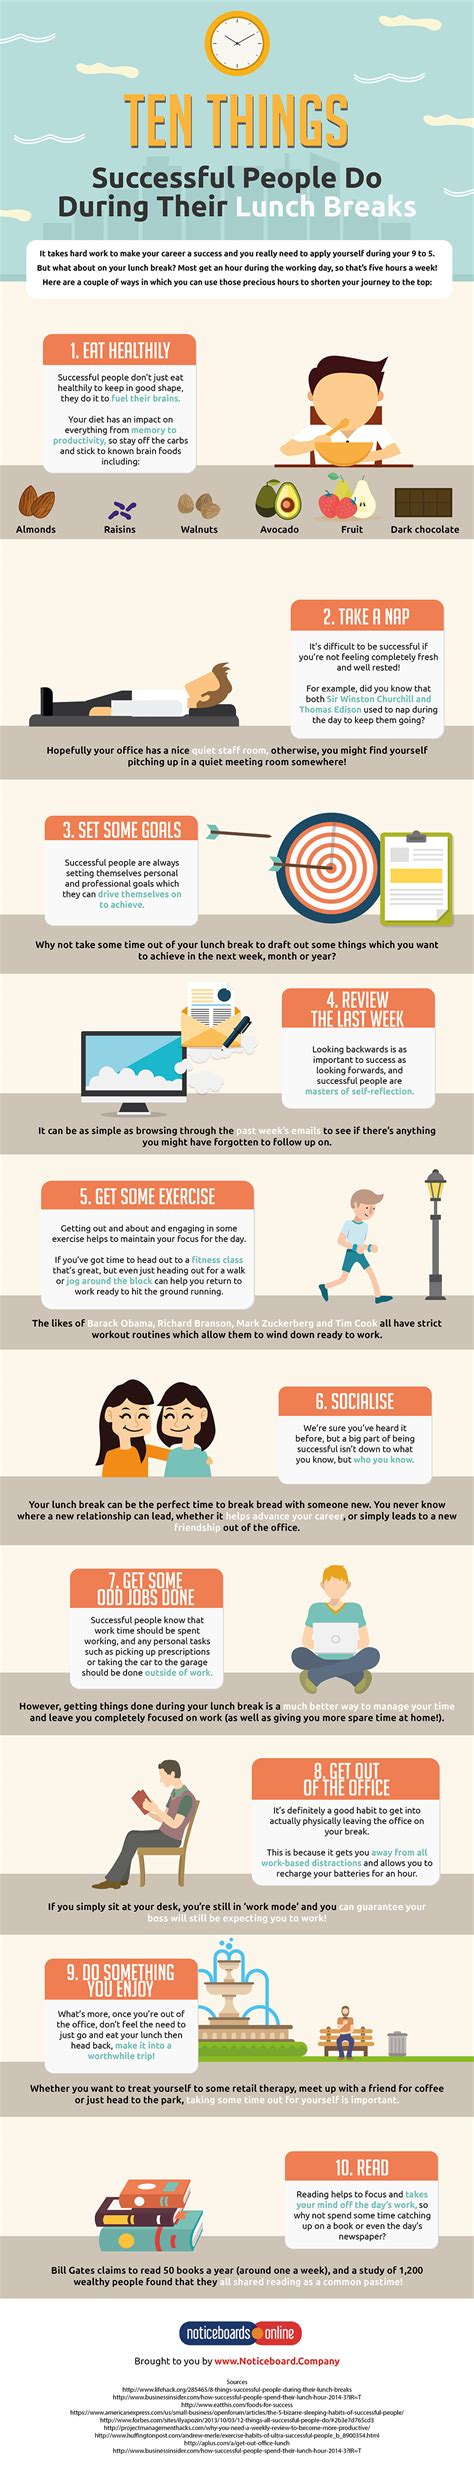 Ten Things Successful People Do During Their Lunch Breaks Infographic